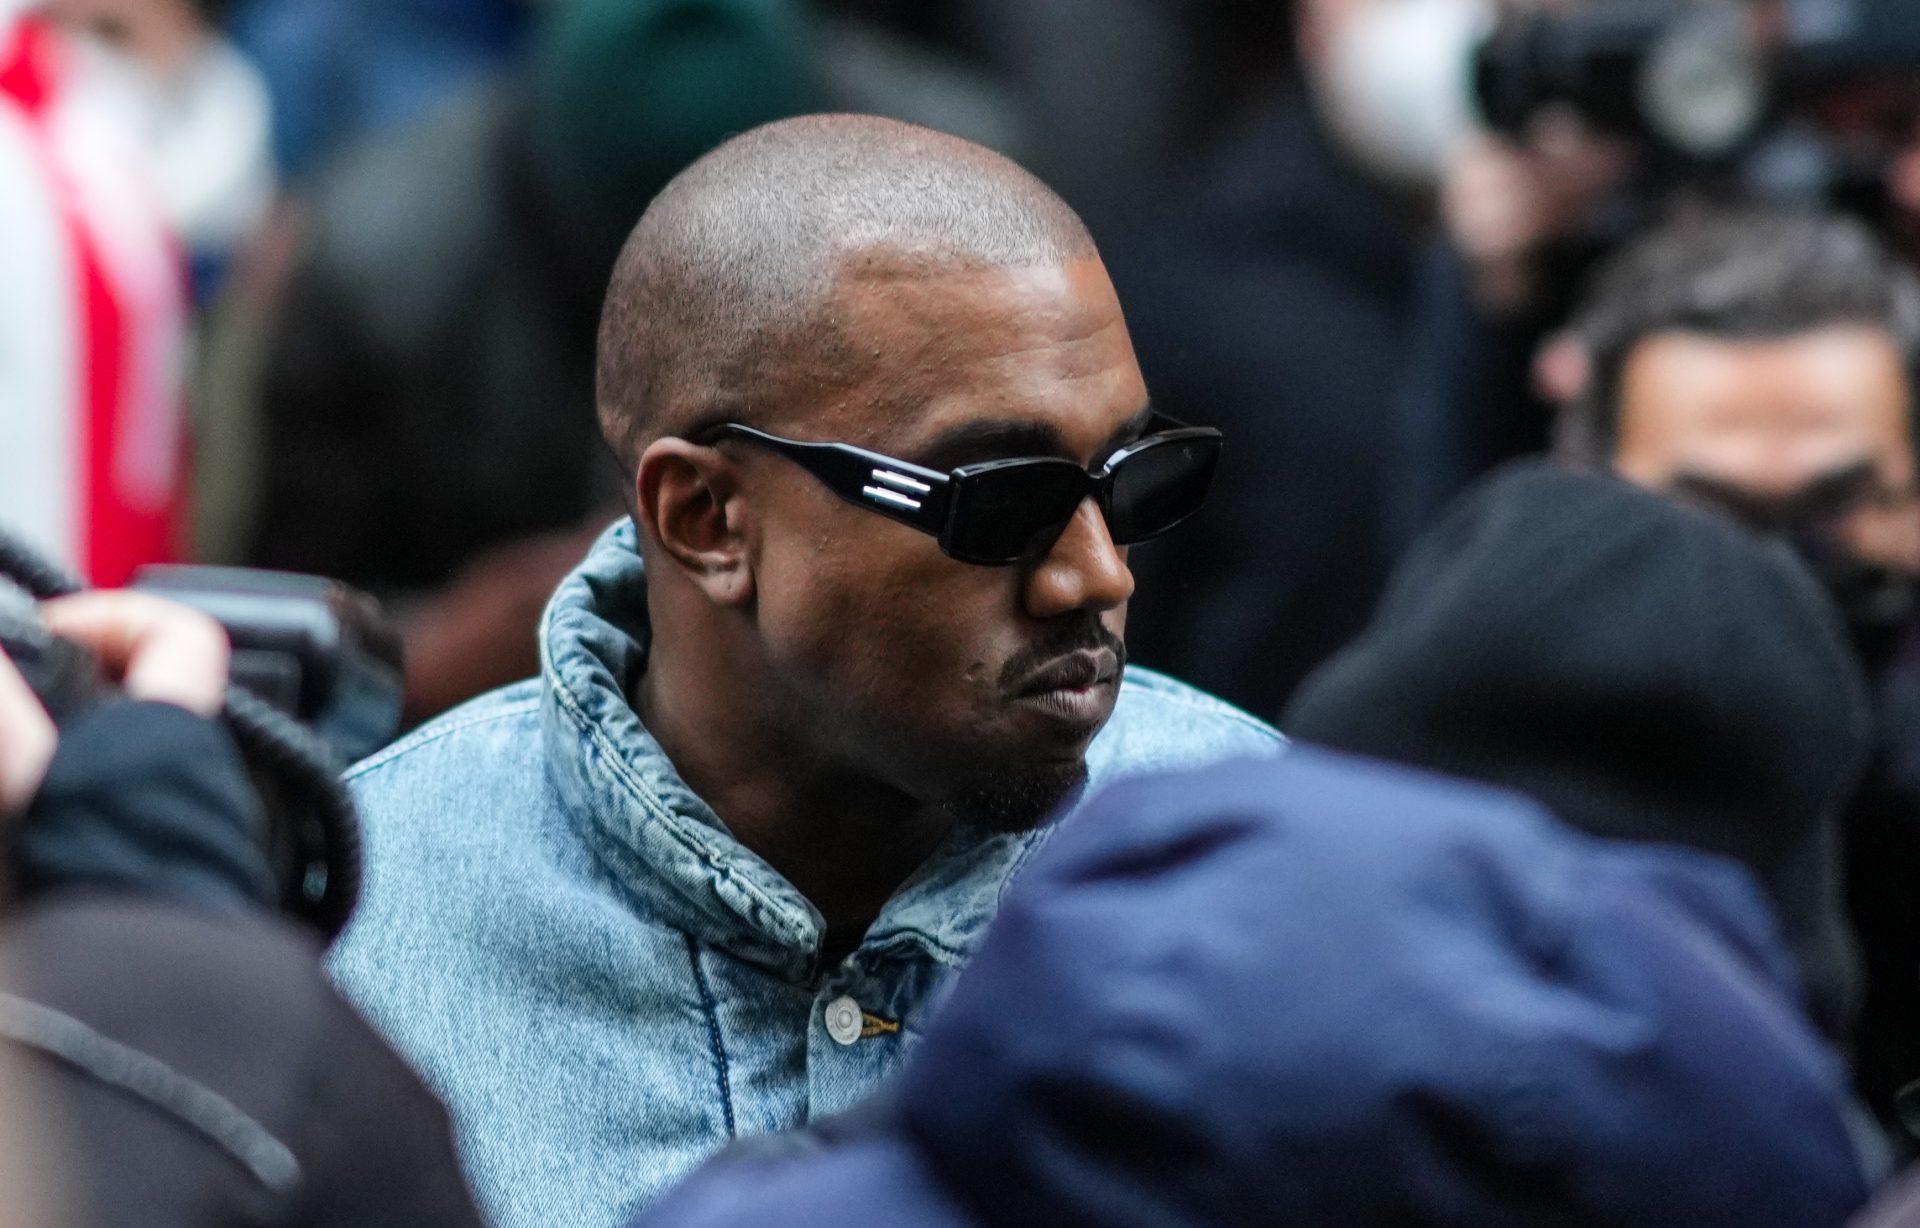 Balenciaga Cuts Ties With Ye Two Weeks After Adidas Placed Their Yeezy Partnership "Under Review"